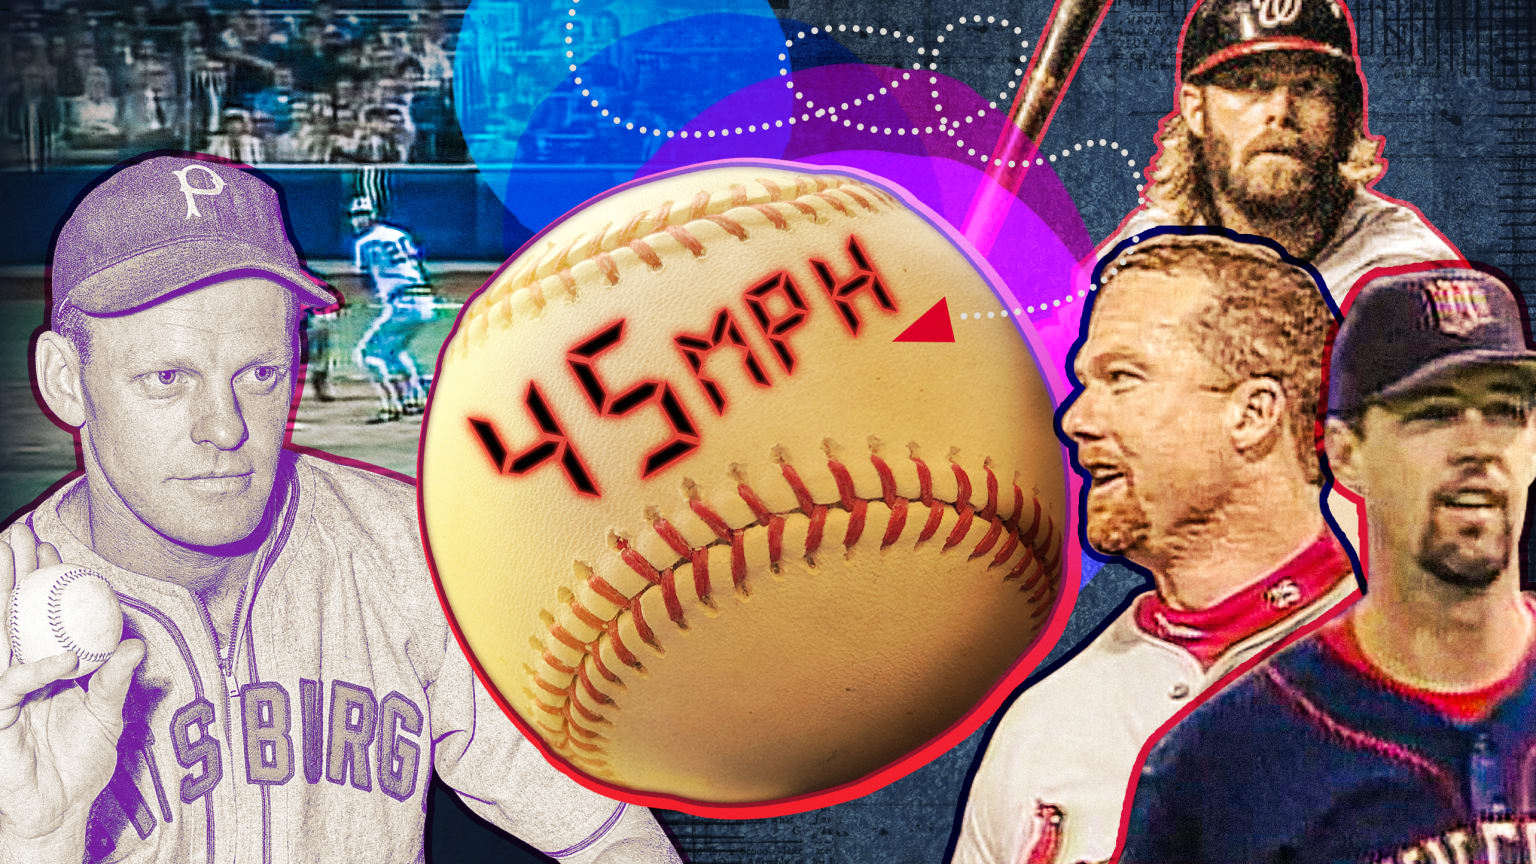 A photo illustration shows various players around a baseball with the text 45 mph on it